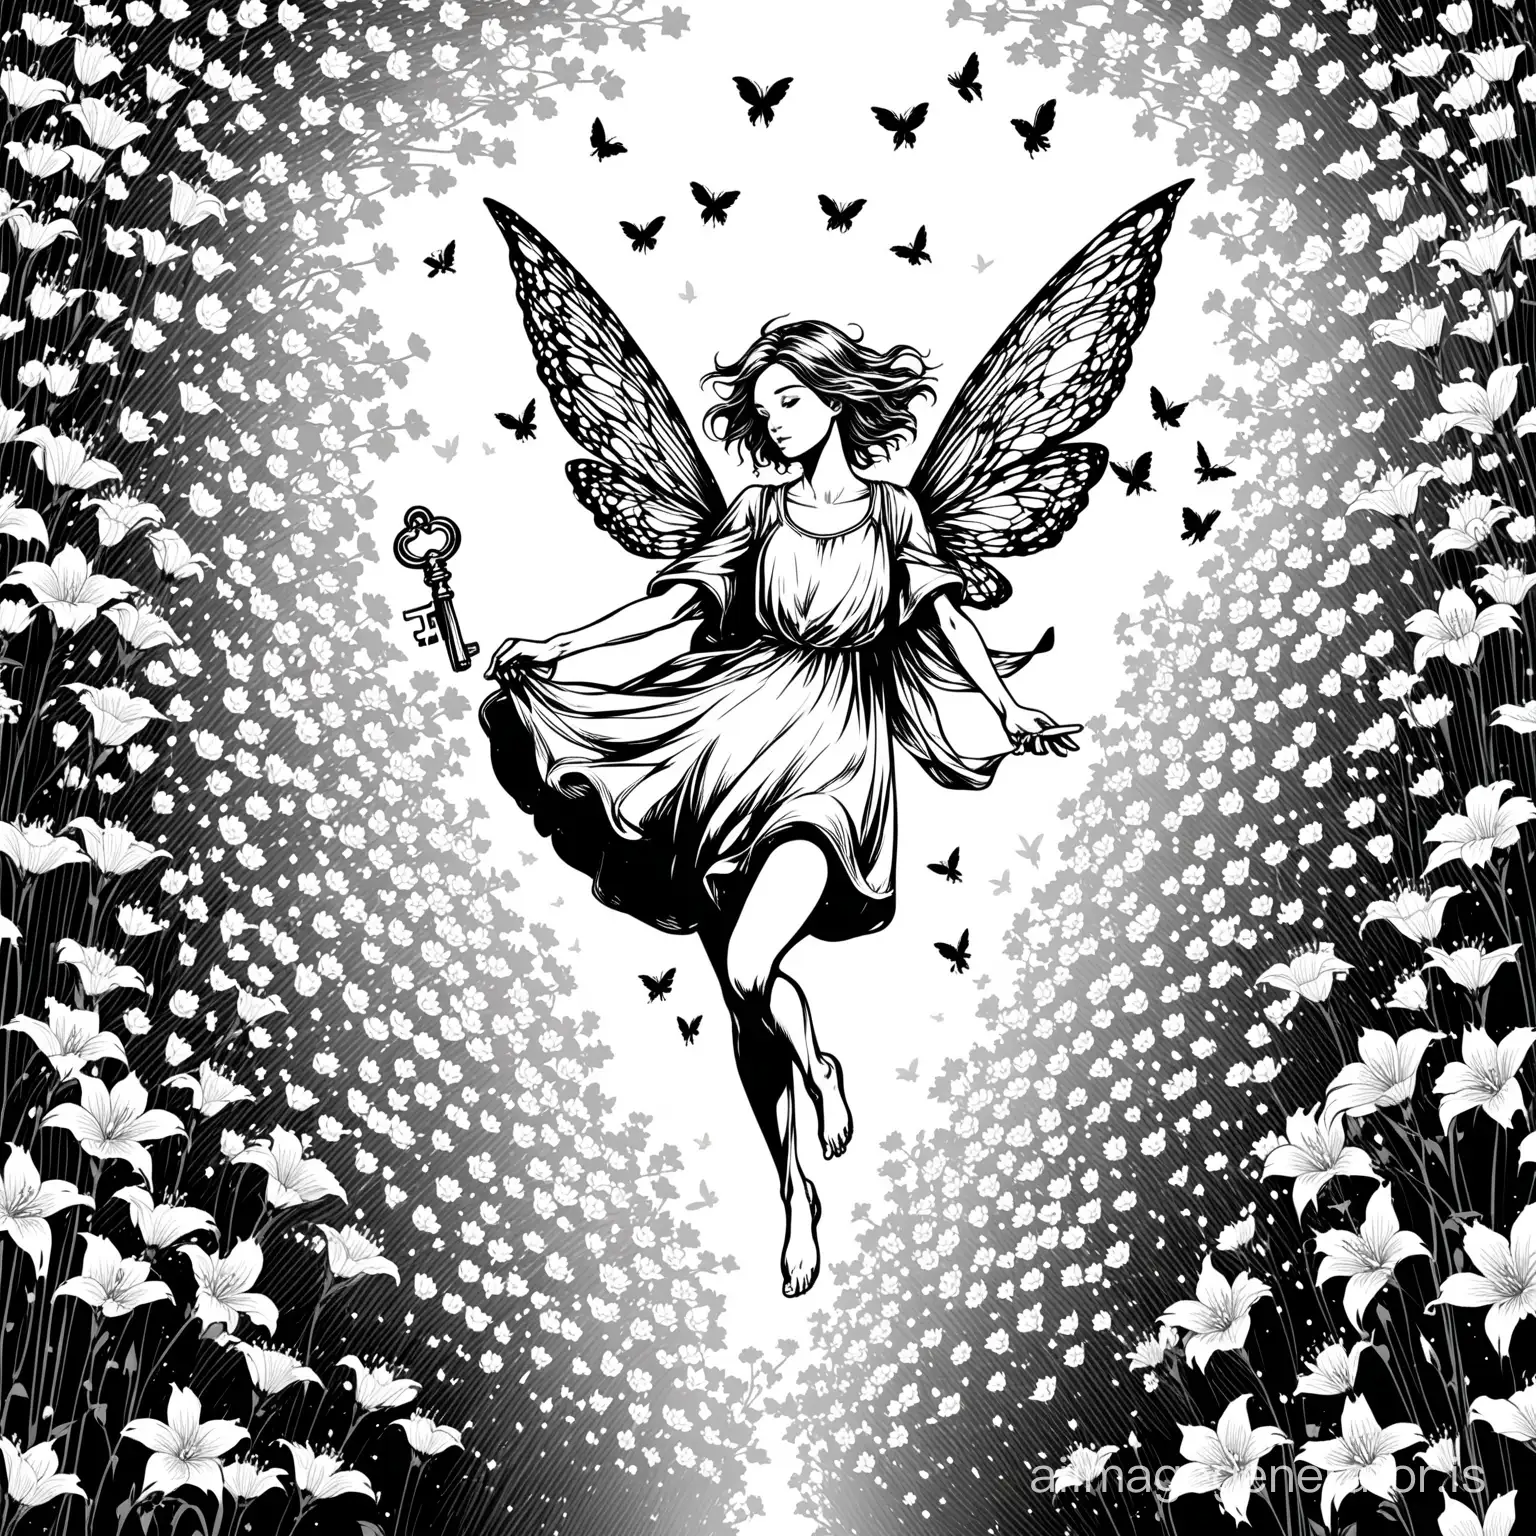 Vectorial art, black and white. androgynous faerie flying among bellflowers, carrying a key bigger than she is